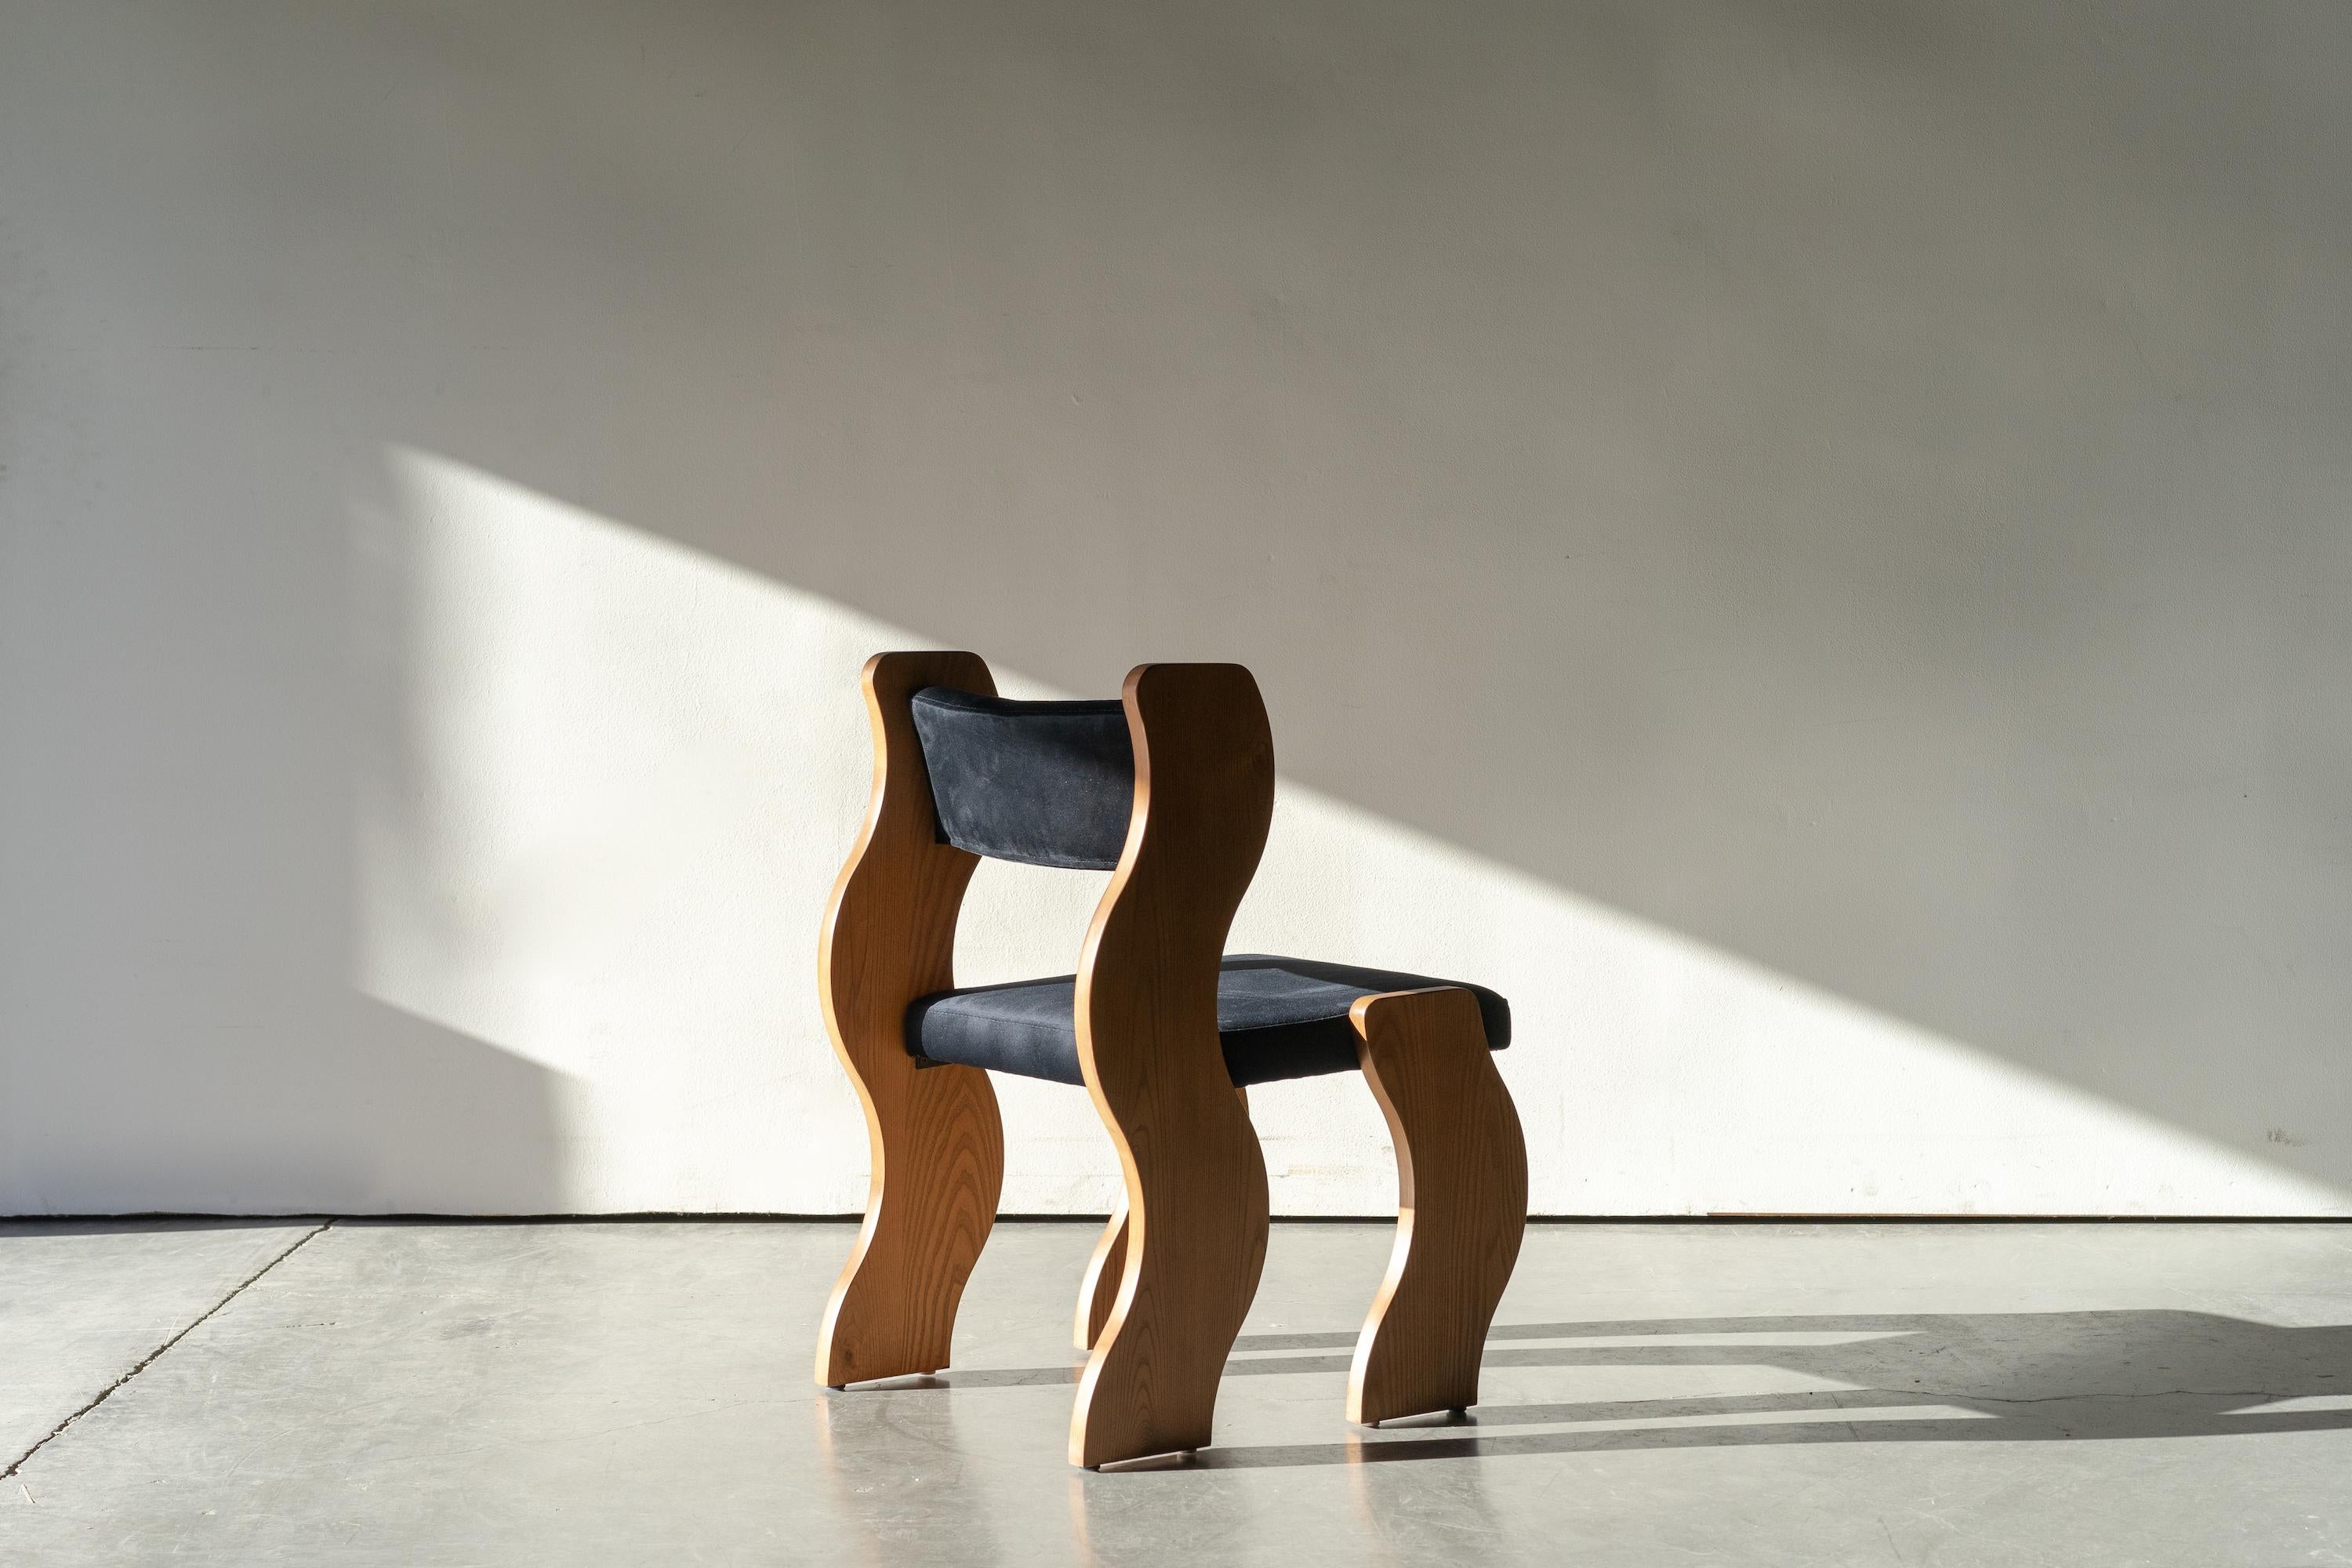 Sometimes a piece evolves from a place you don’t expect. That’s the story of the Wave chair: designed around the Wave Shelf motif, which itself was born from the ashes of a curved low stand. Sometimes a piece takes many iterations and dozens of